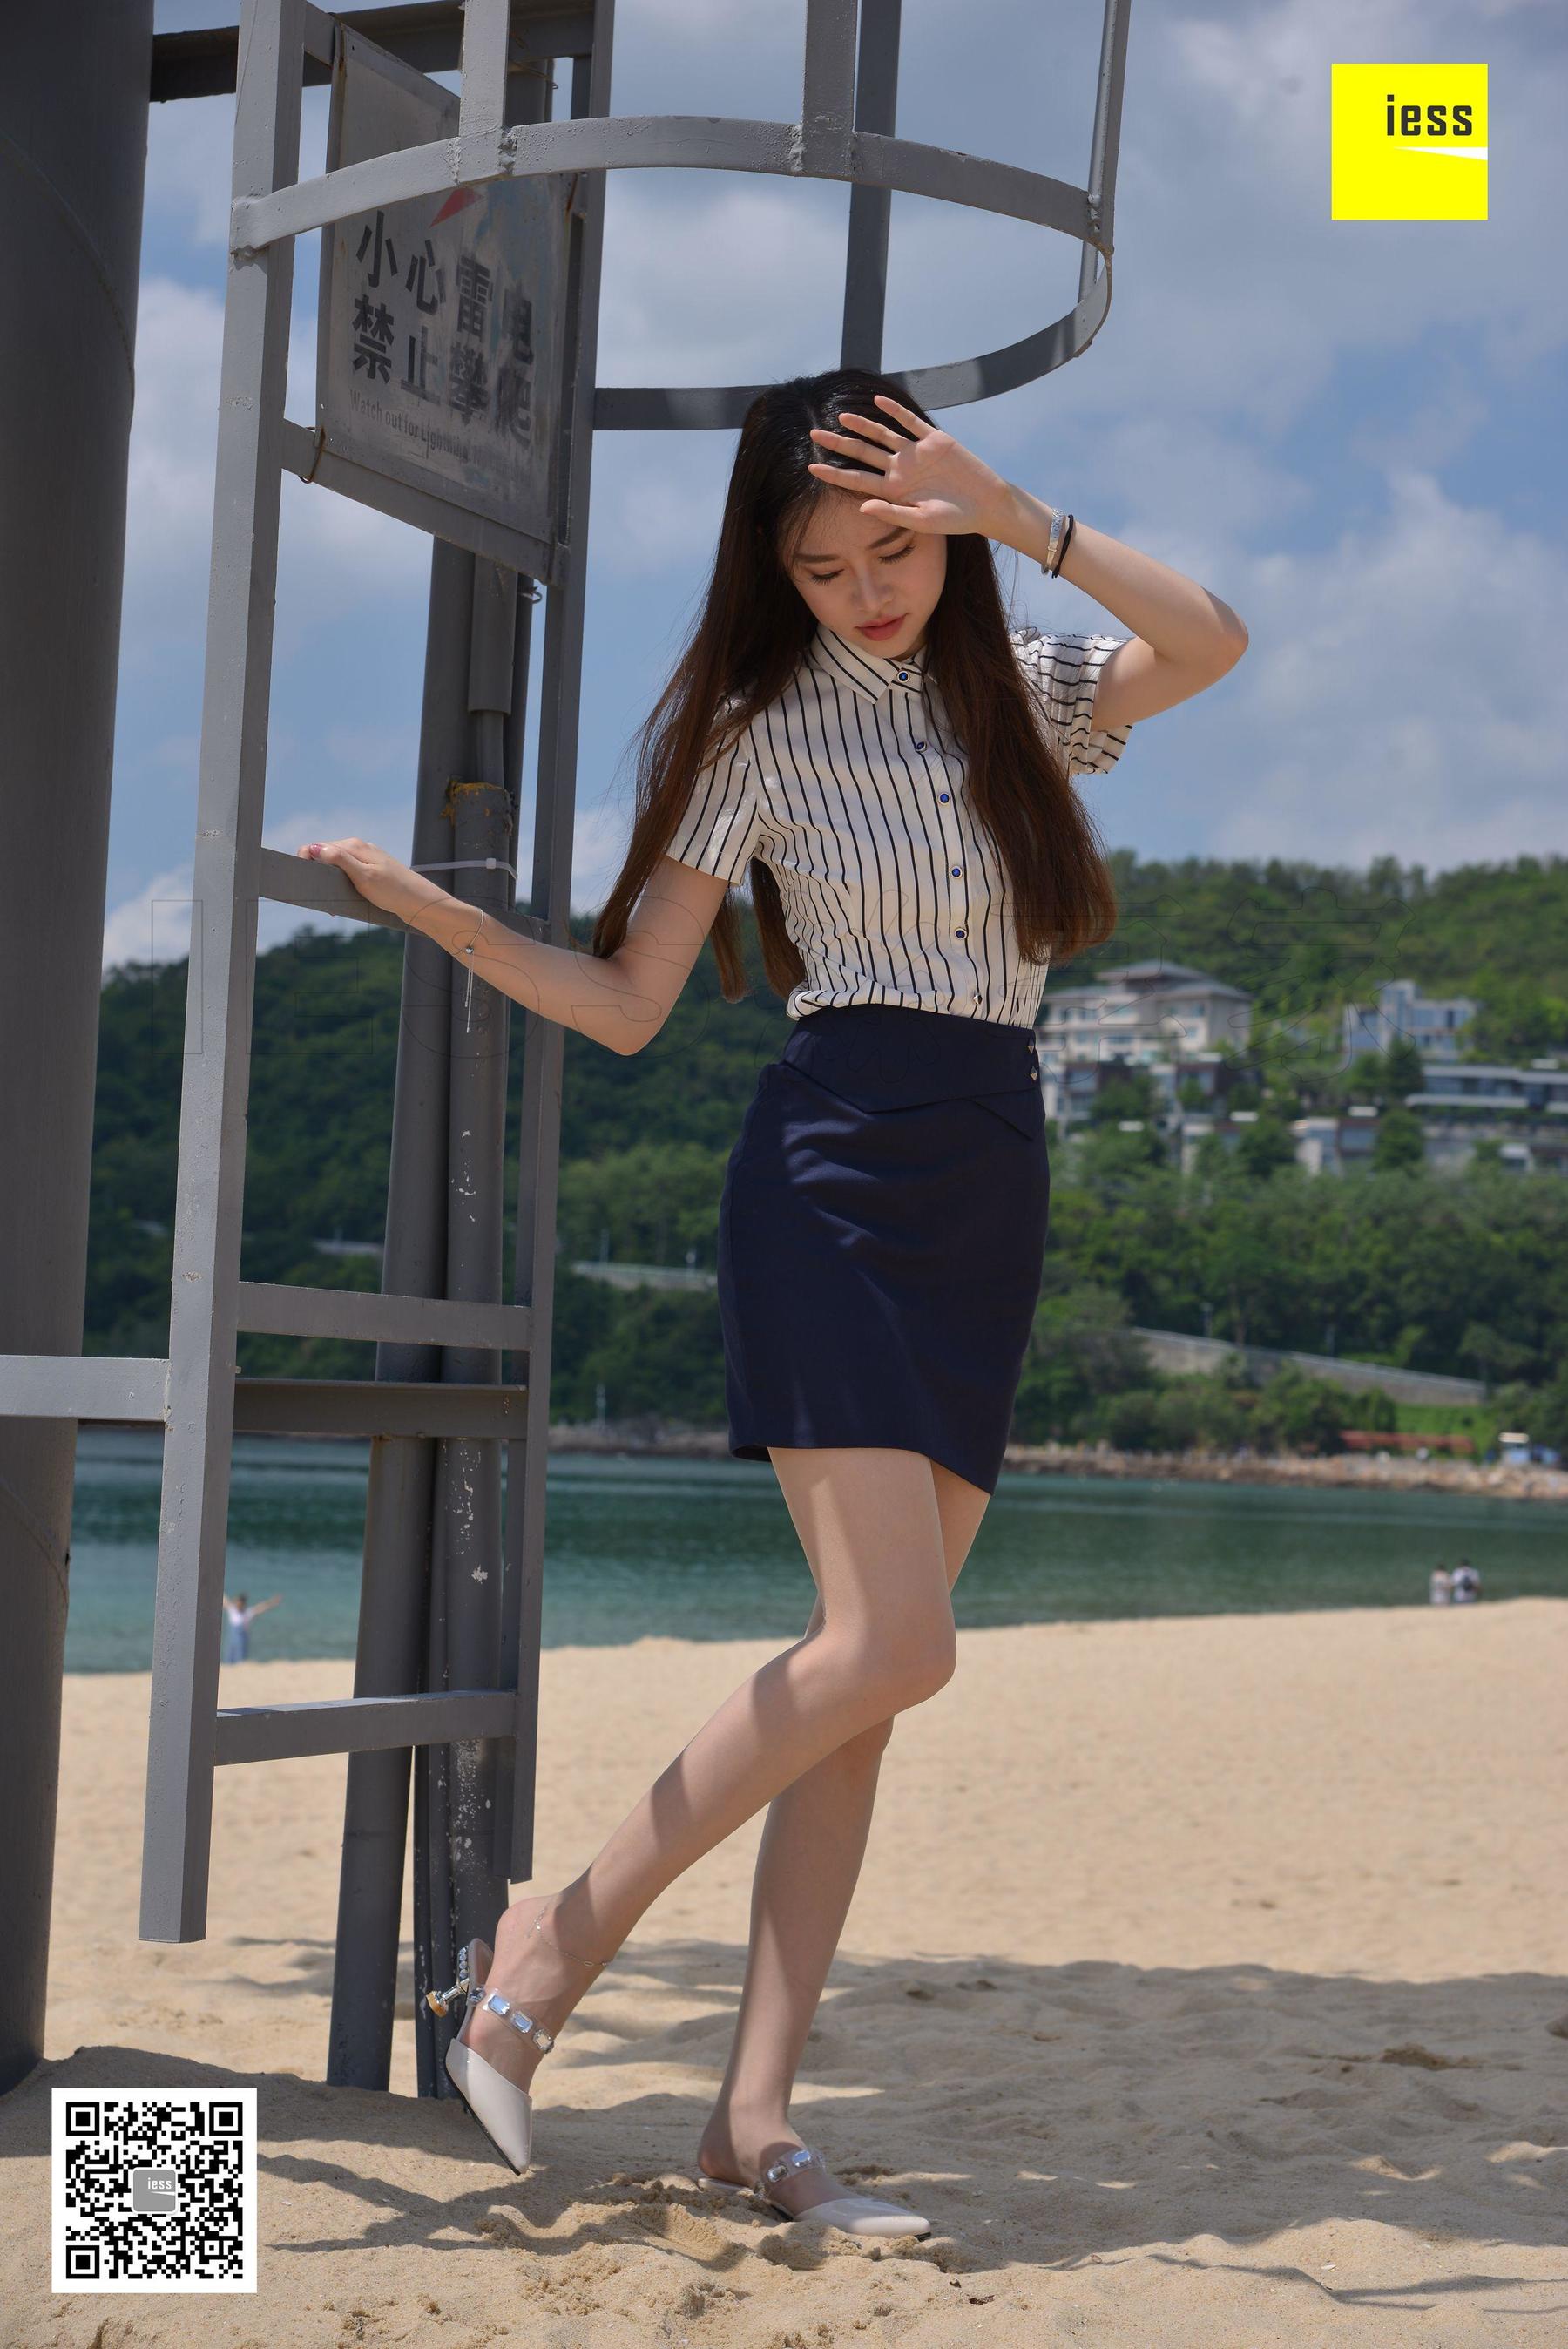 Jia Jia "Beach Uniform·Sixiang Jia" [Iss Quxiang IESS] "Devil Wednesday" Special Issue 26 Page 61 No.6668ad